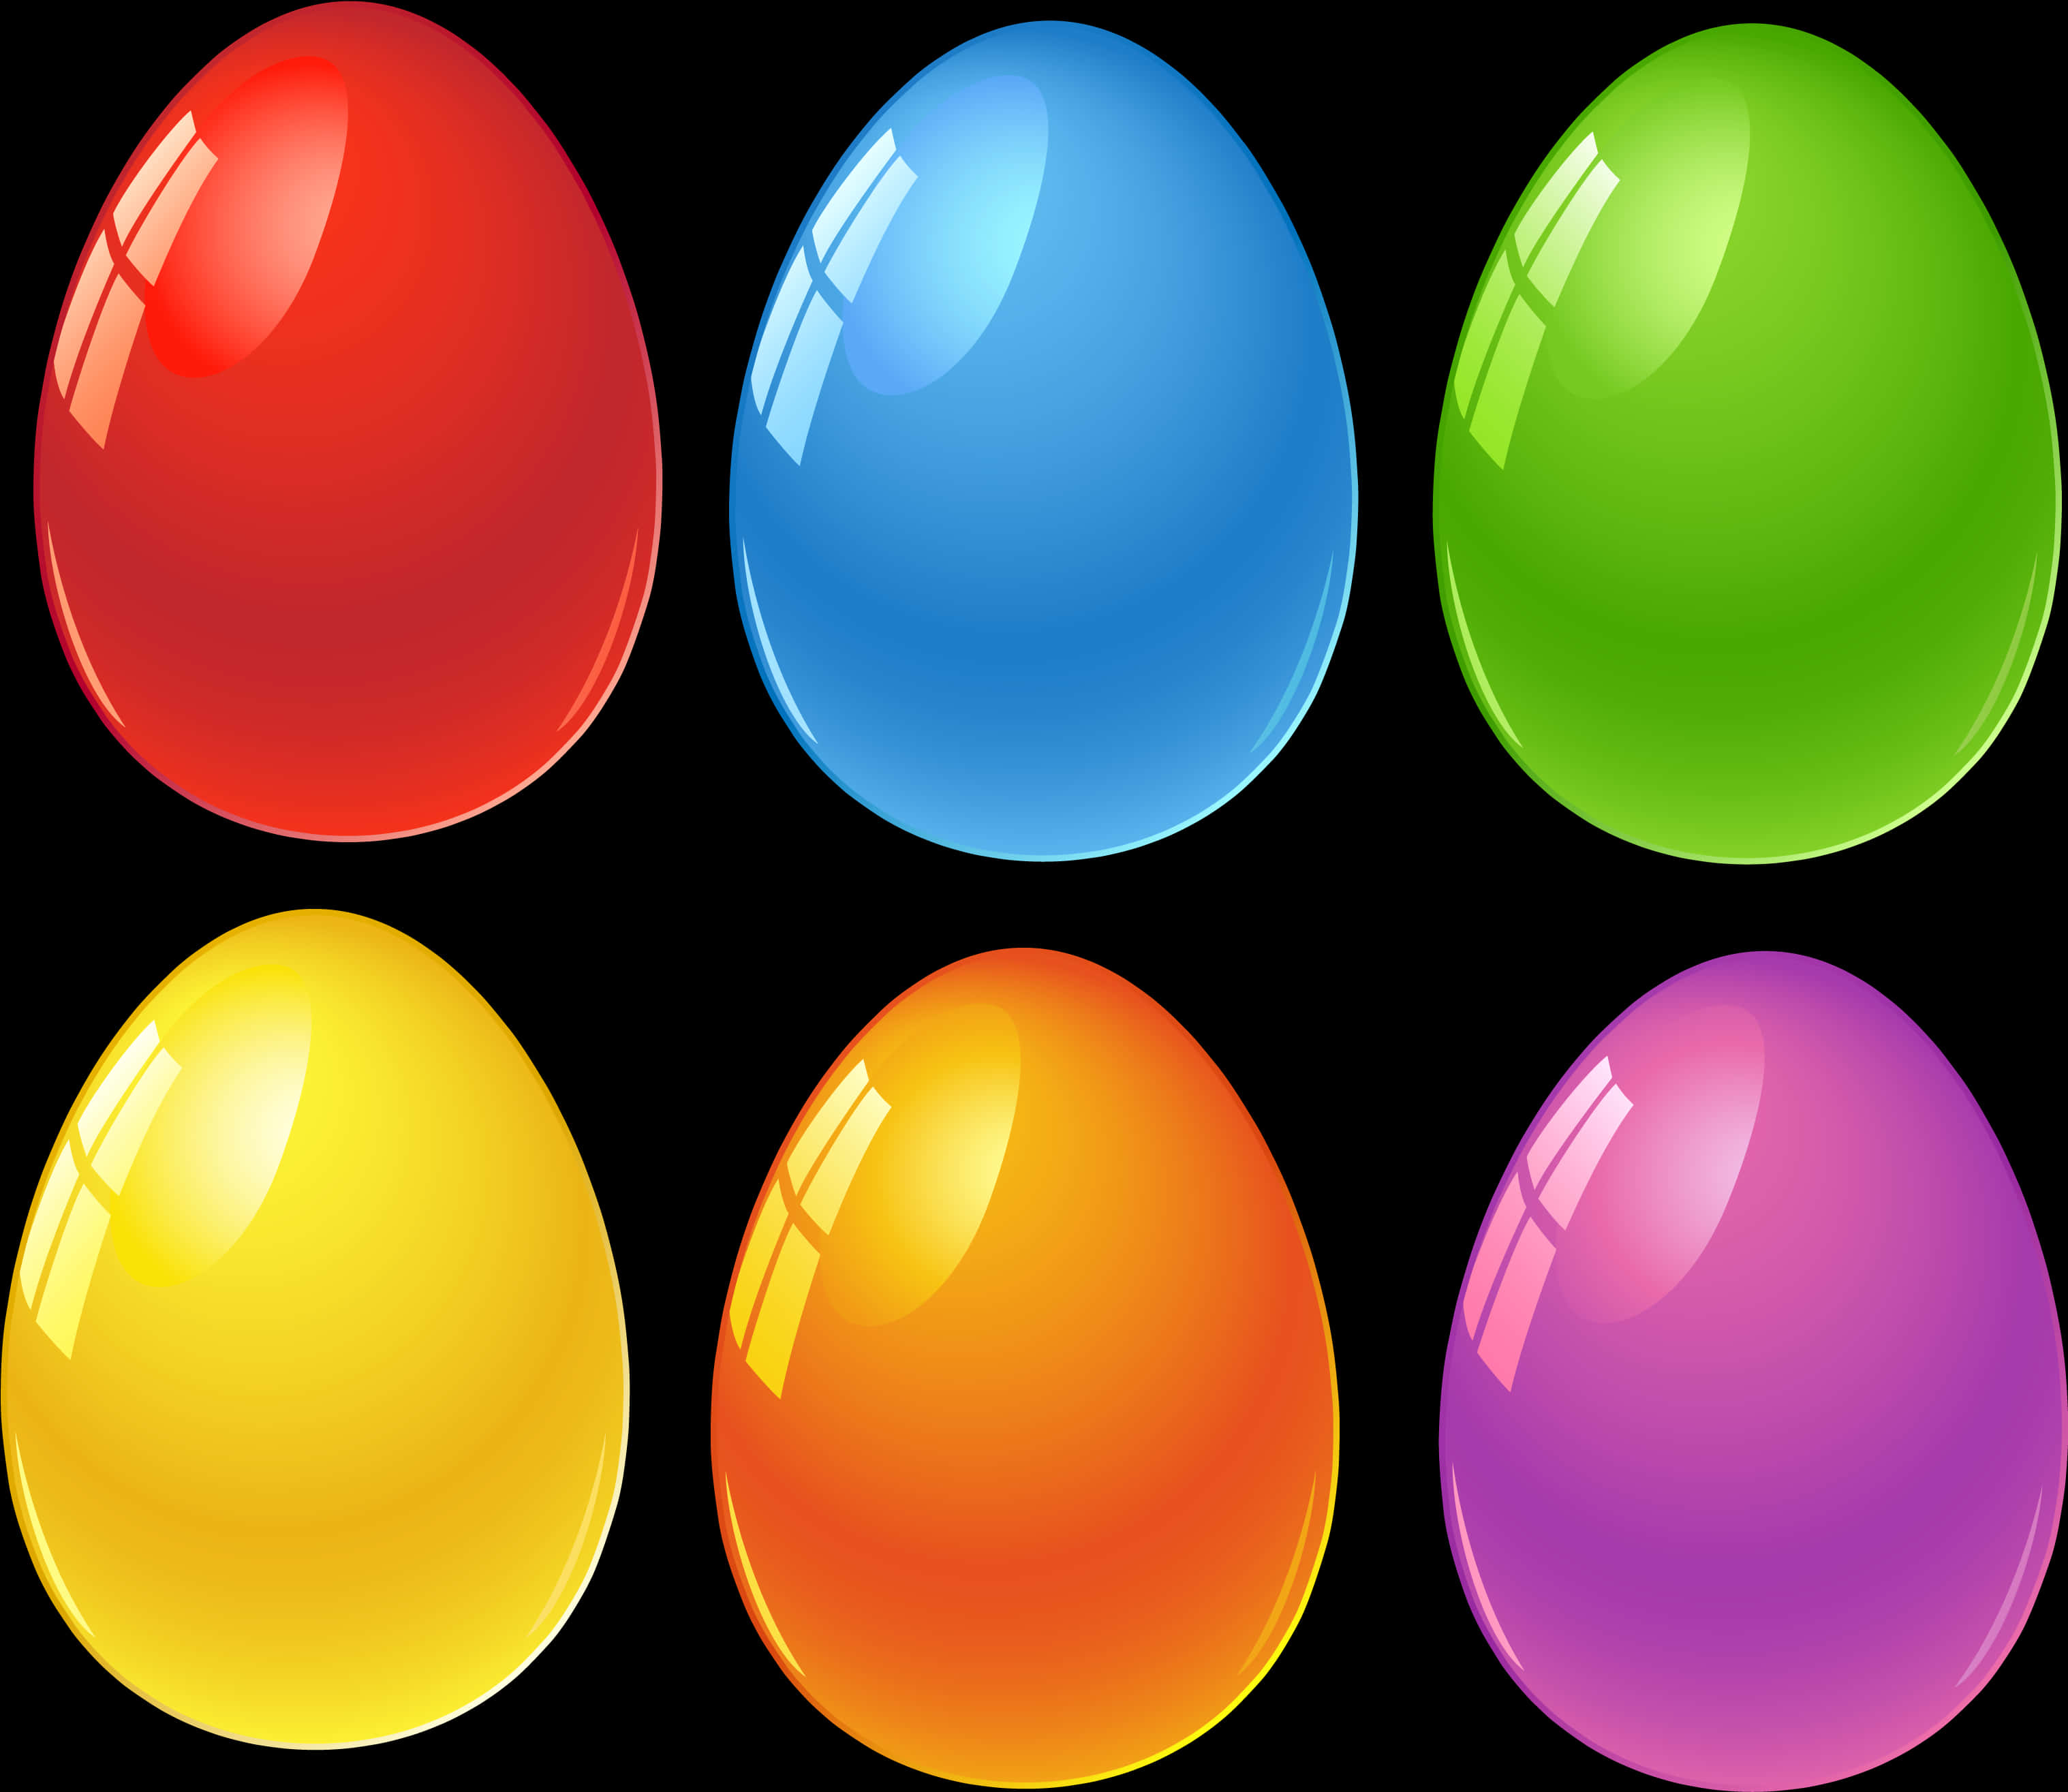 A Group Of Colorful Eggs